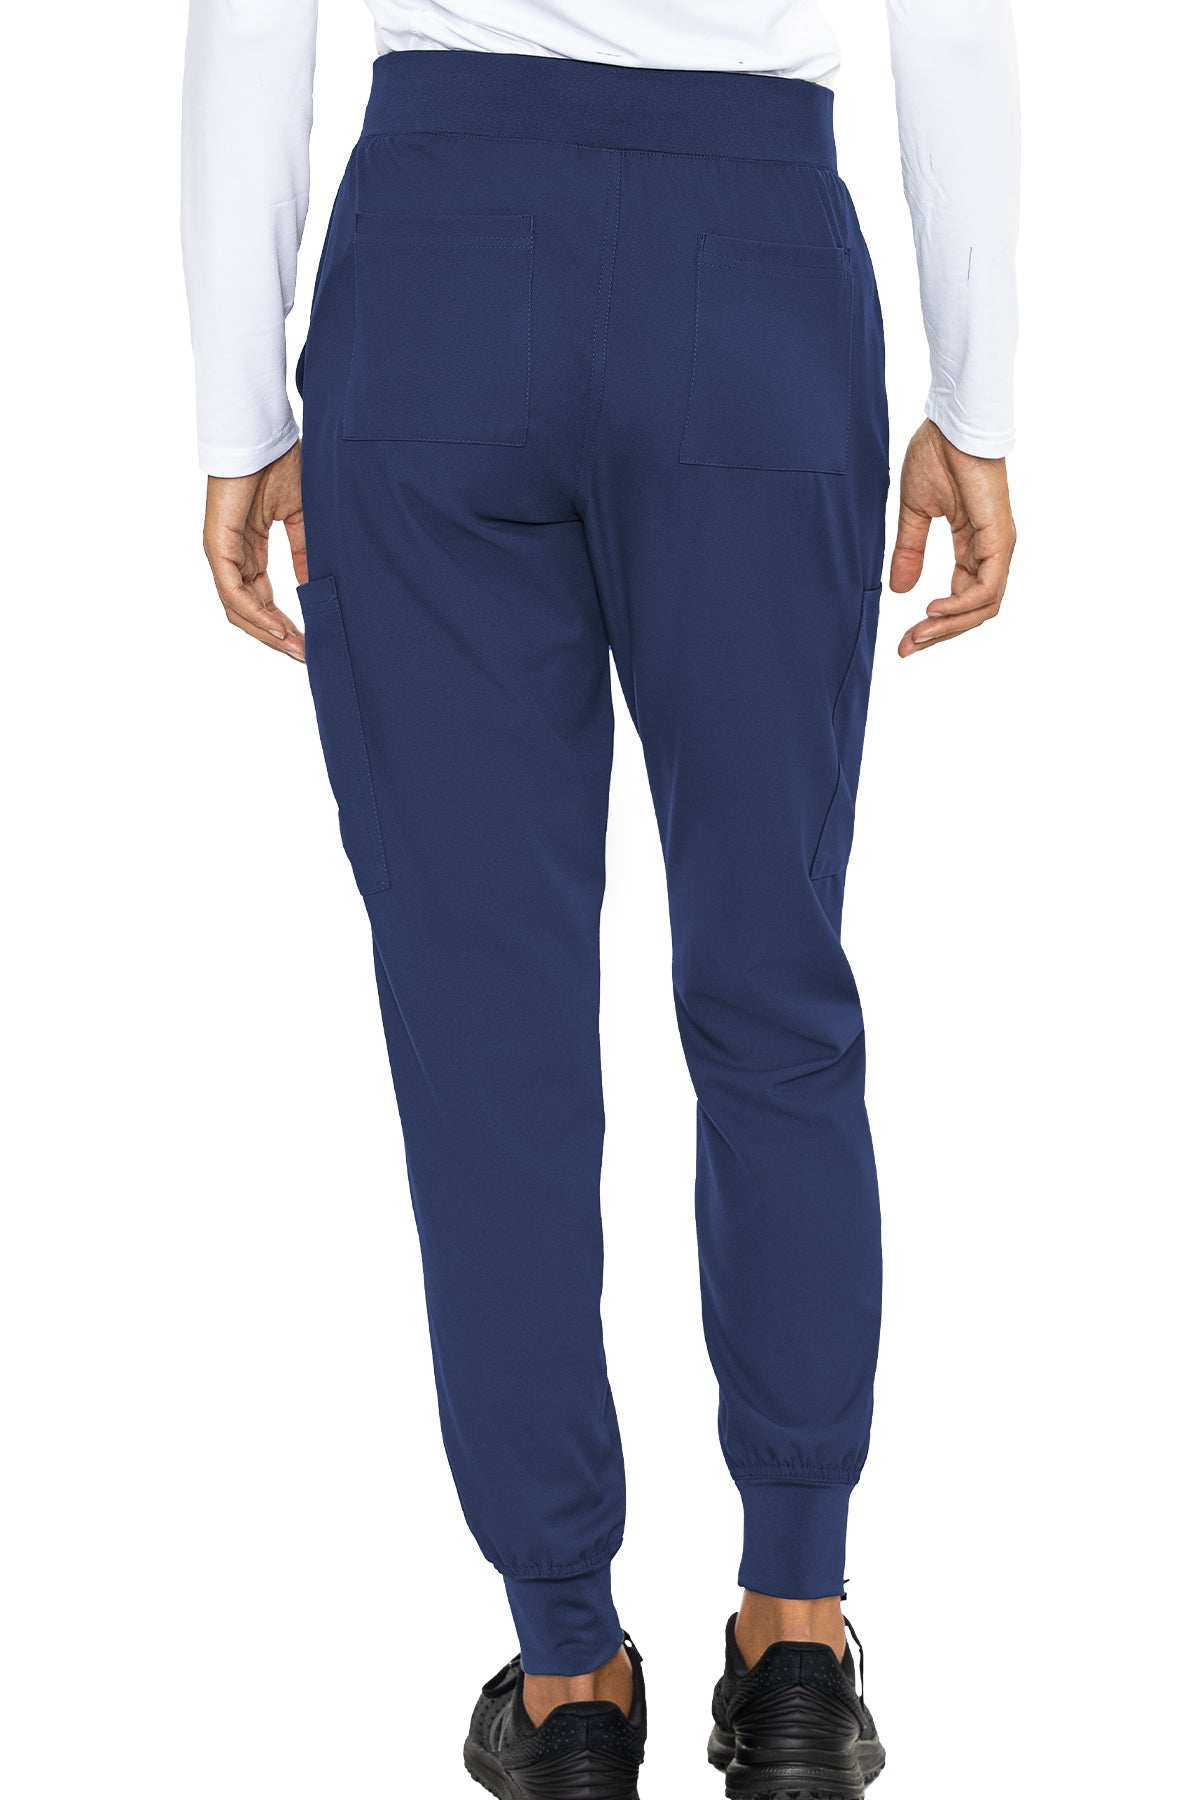 Med Couture 2711 Insight Jogger Pant Navy Back